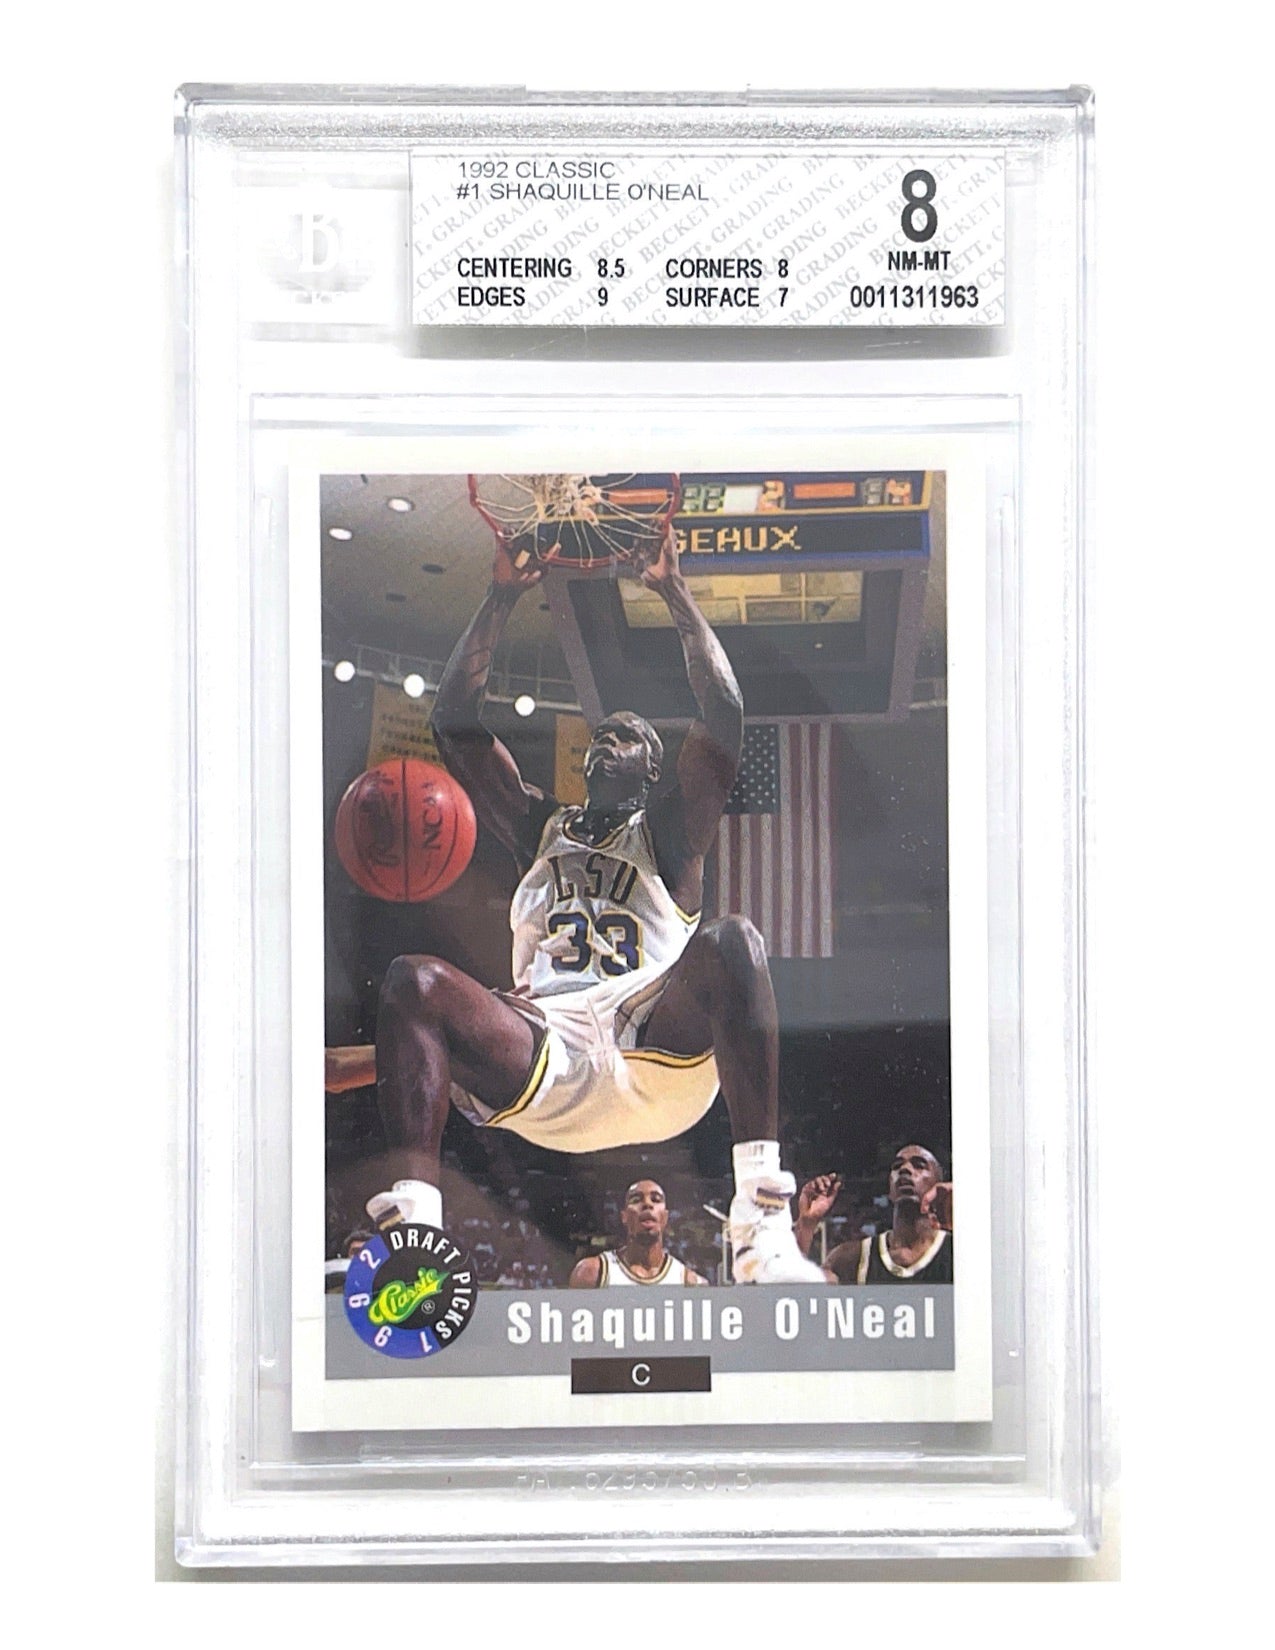 Shaquille O'Neal 1992 Classic #1 - BGS 8